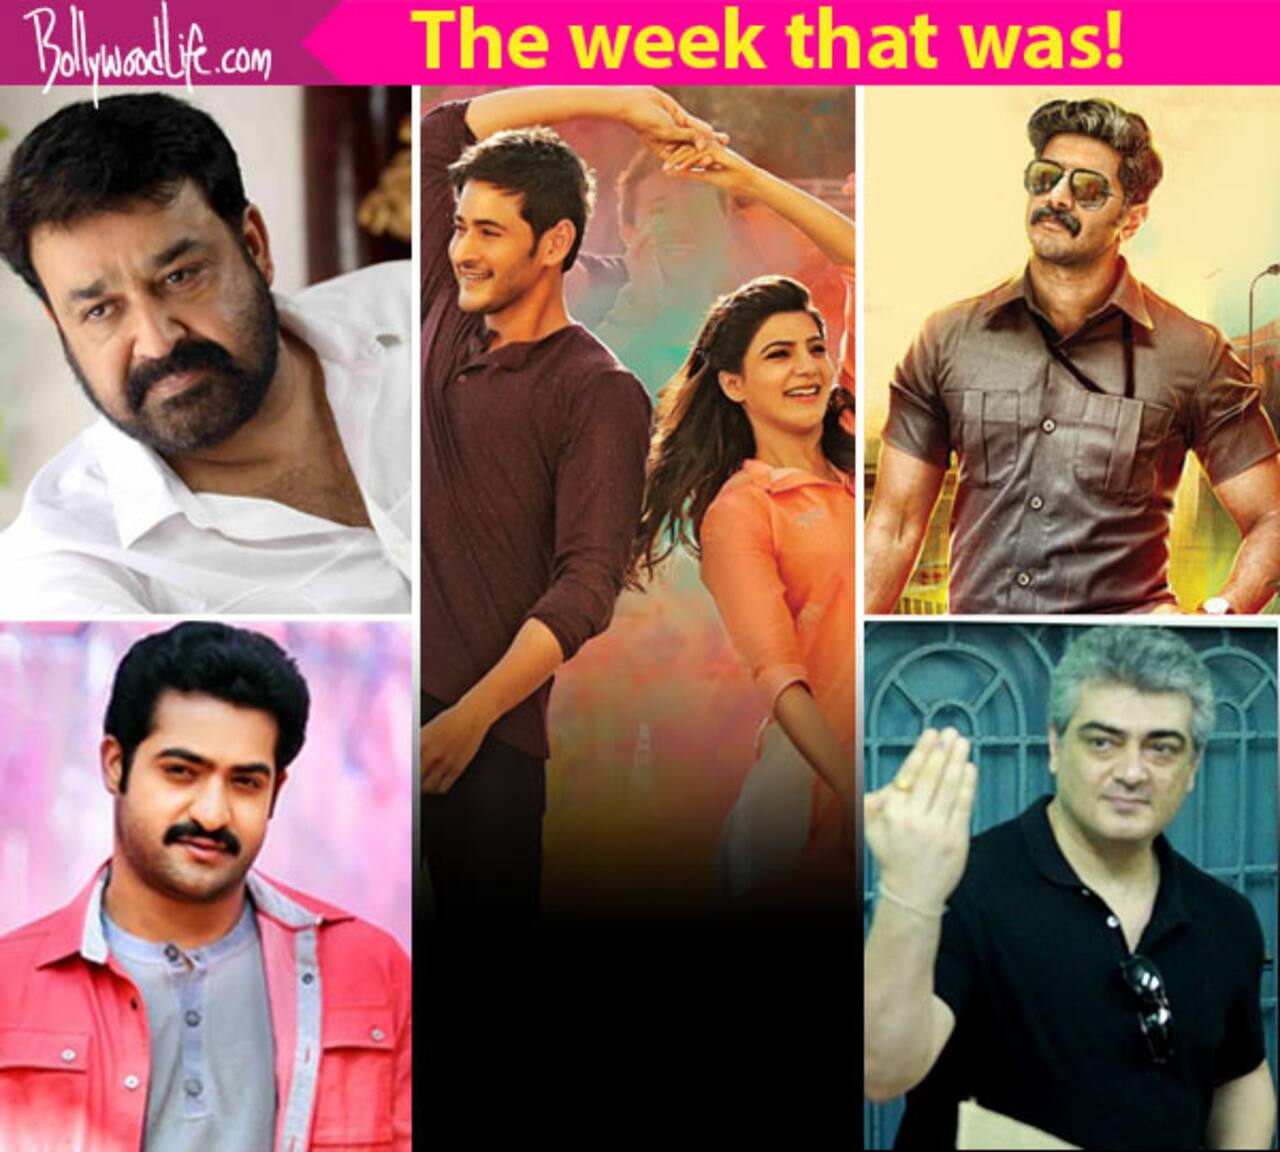 Mahesh Babu's Brahmotsavam release, Jr NTR's Janatha Garage first look, Mohanlal's birthday-take a look at the top 5 newsmakers of the week!